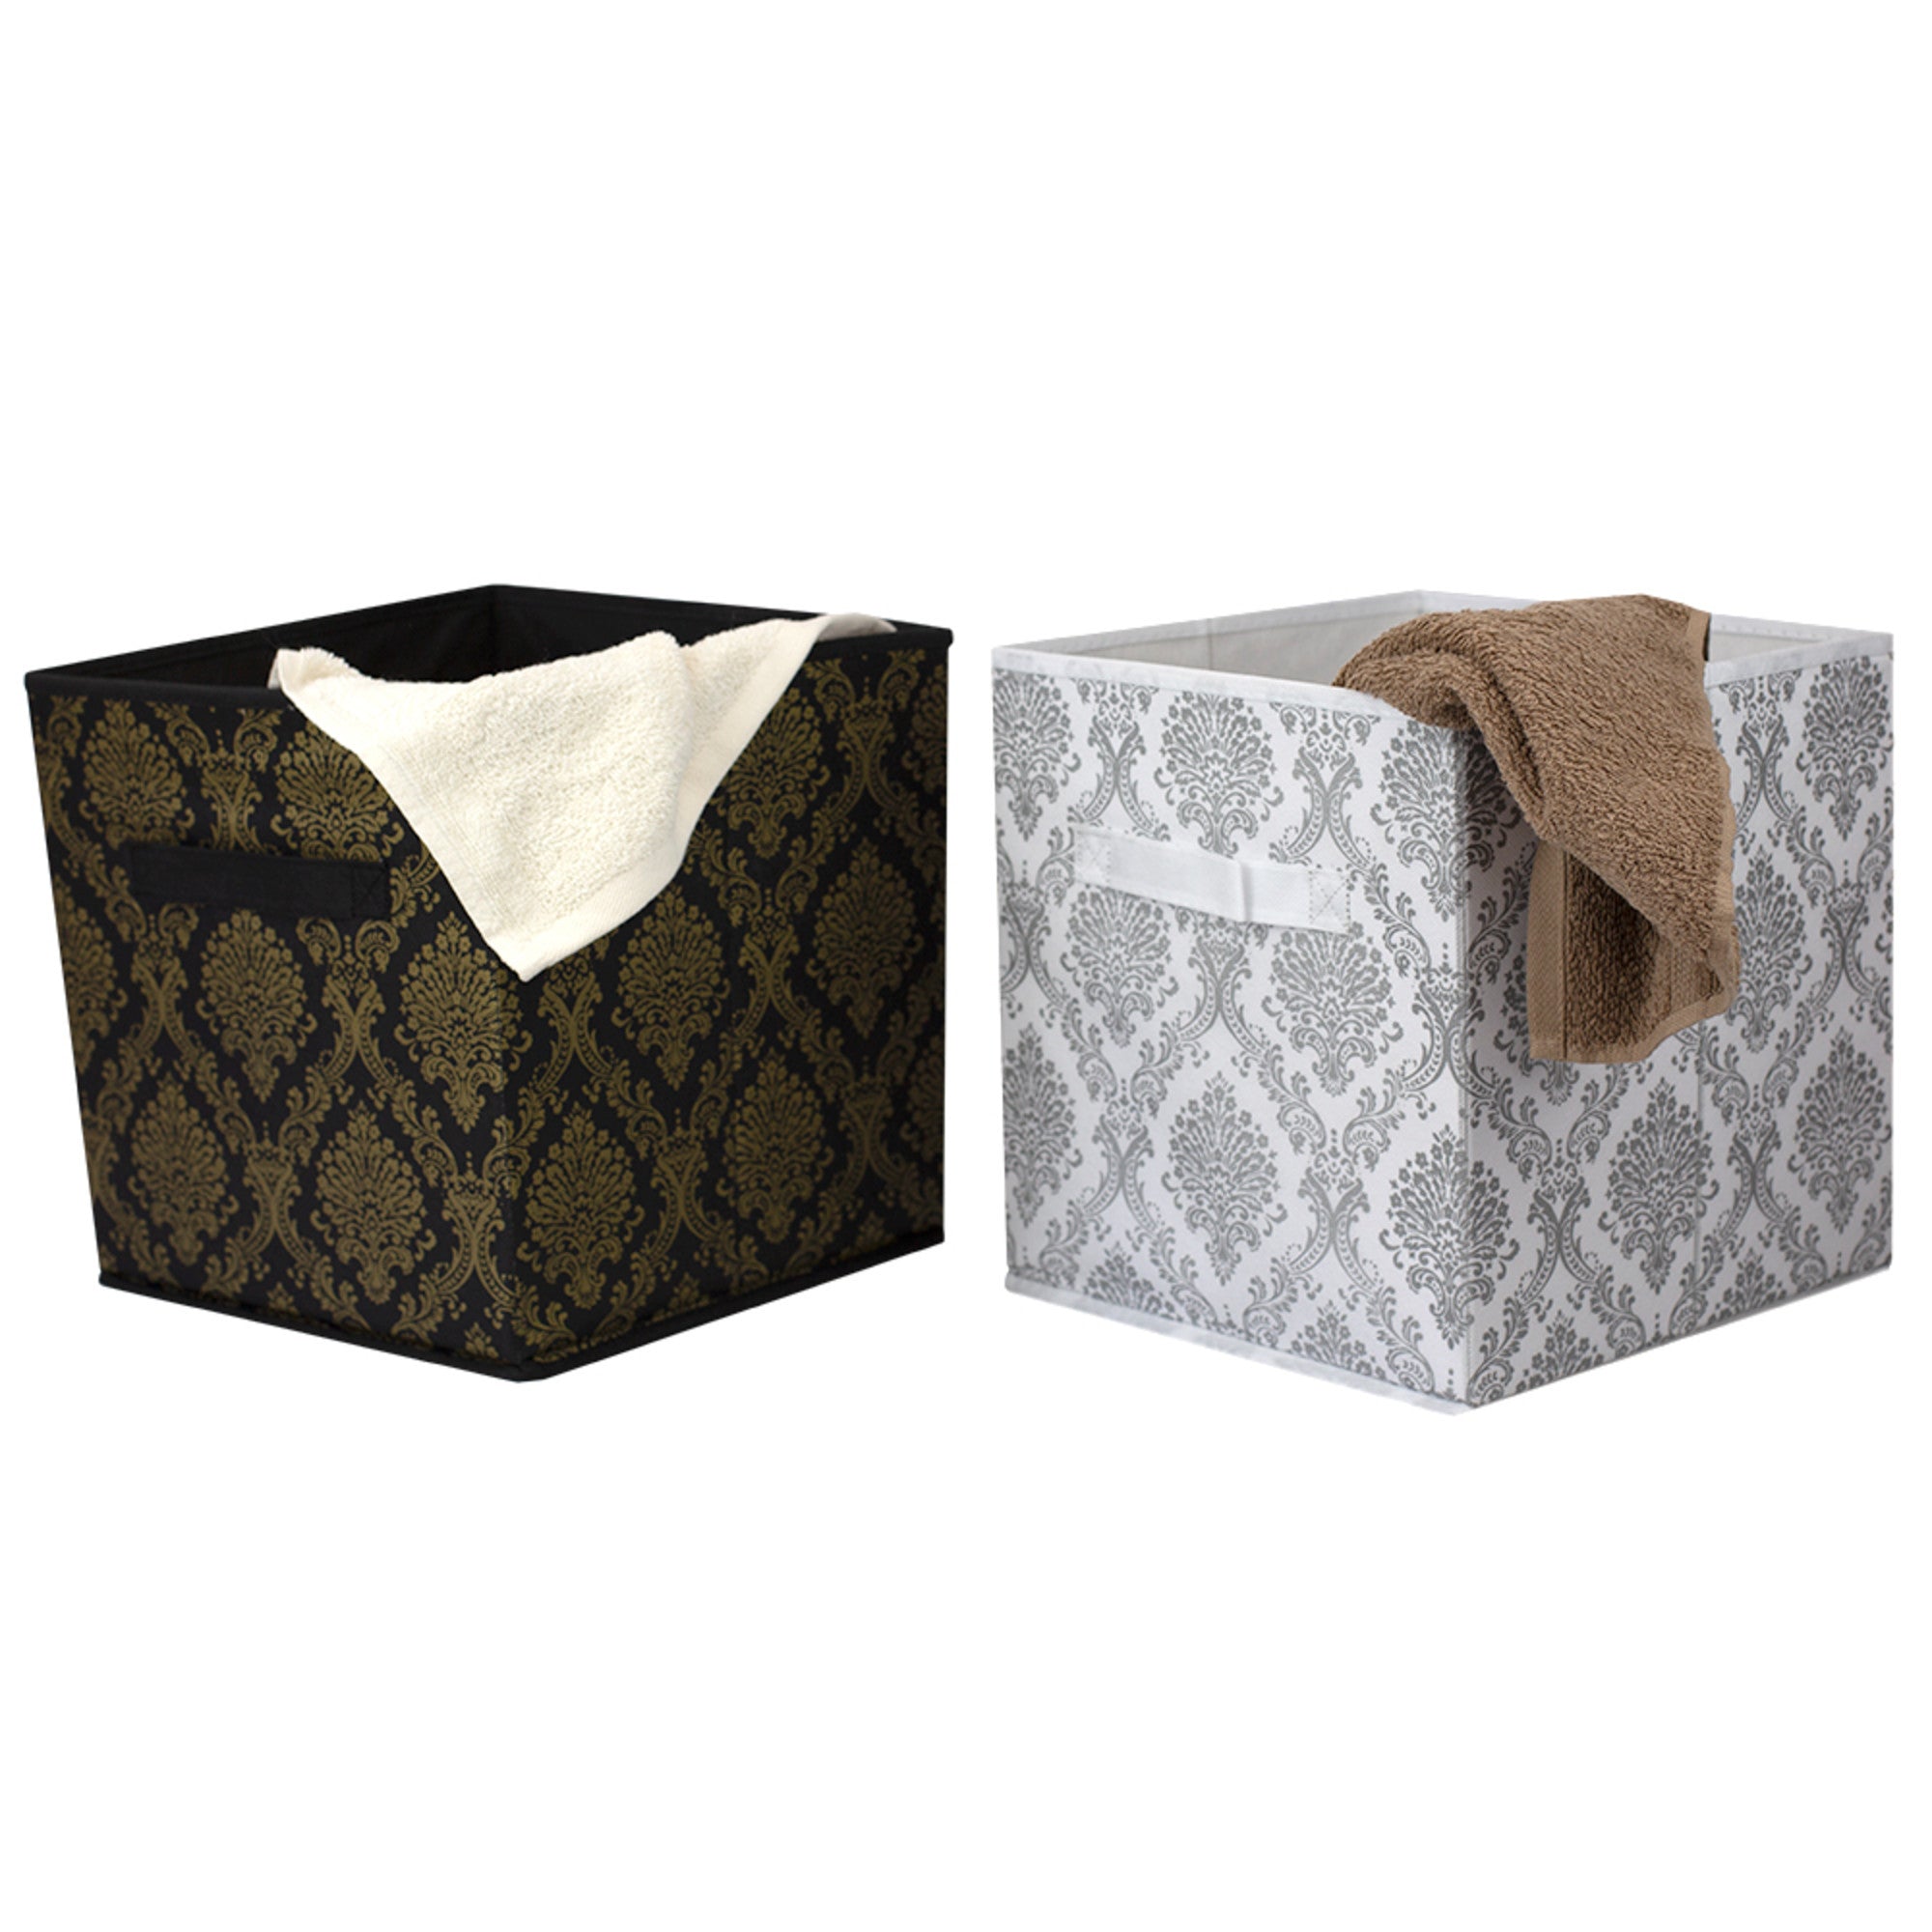 Home Basics Metallic Damask Non-Woven Fabric Collapsible Storage Cube with Built-in Handle - Assorted Colors